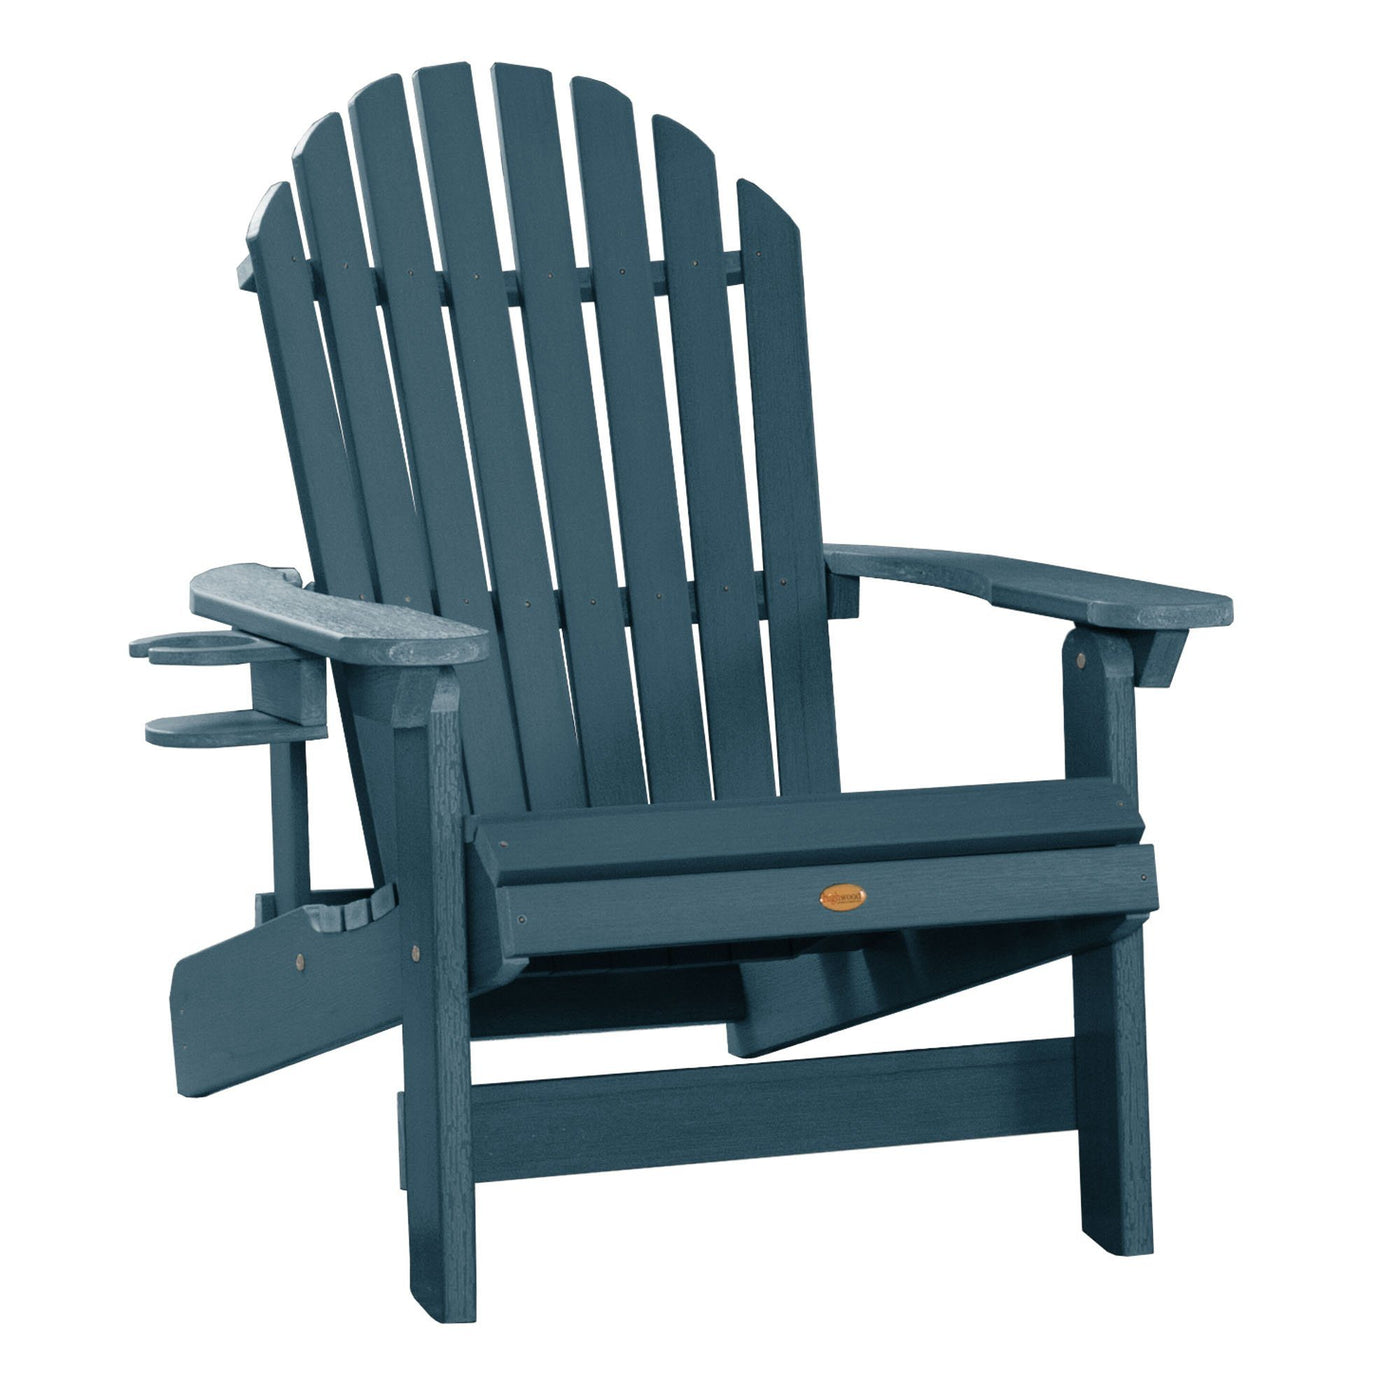 1 King Hamilton Folding and Reclining Adirondack Chair with 1 Easy-add Cup Holder Highwood USA Nantucket Blue 